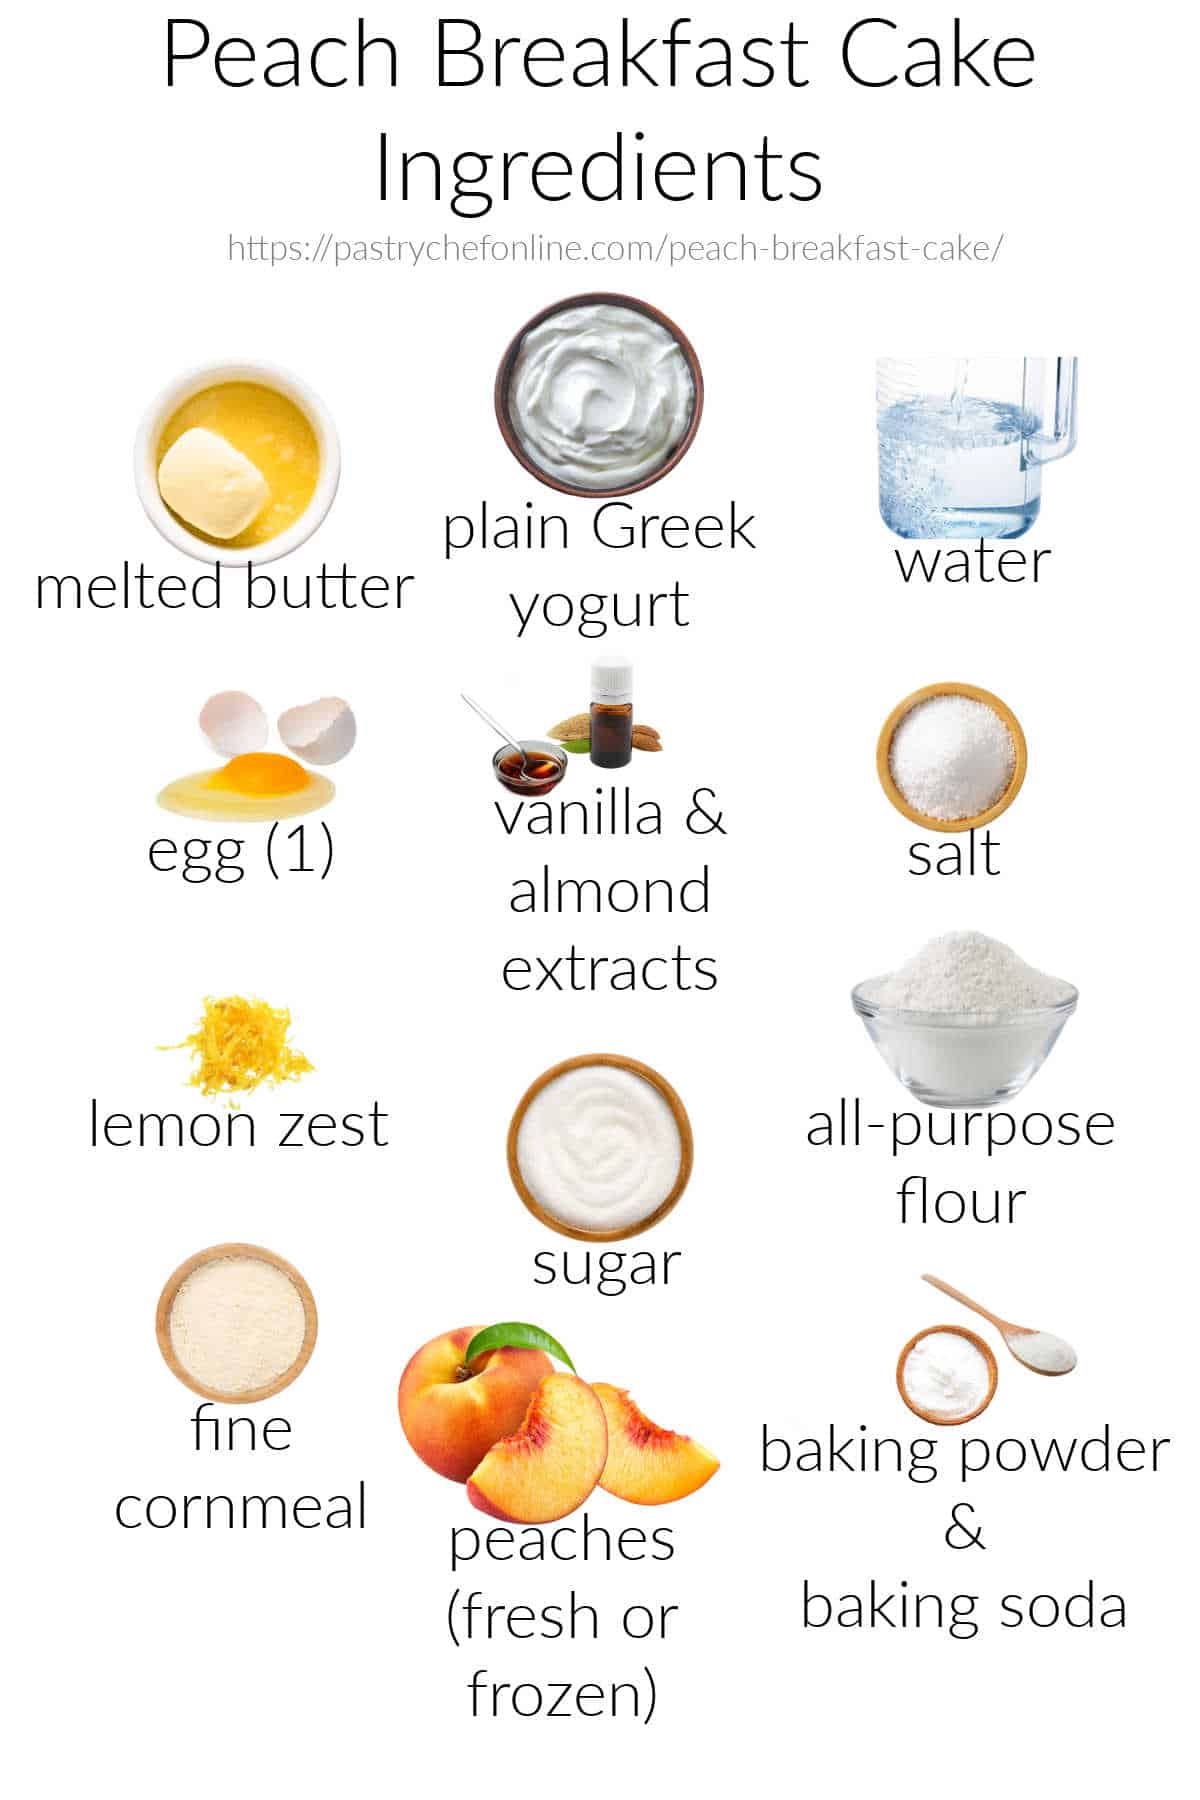 Images of all the ingredients needed to make peach breakfast cake, labeled and shot on a white background.